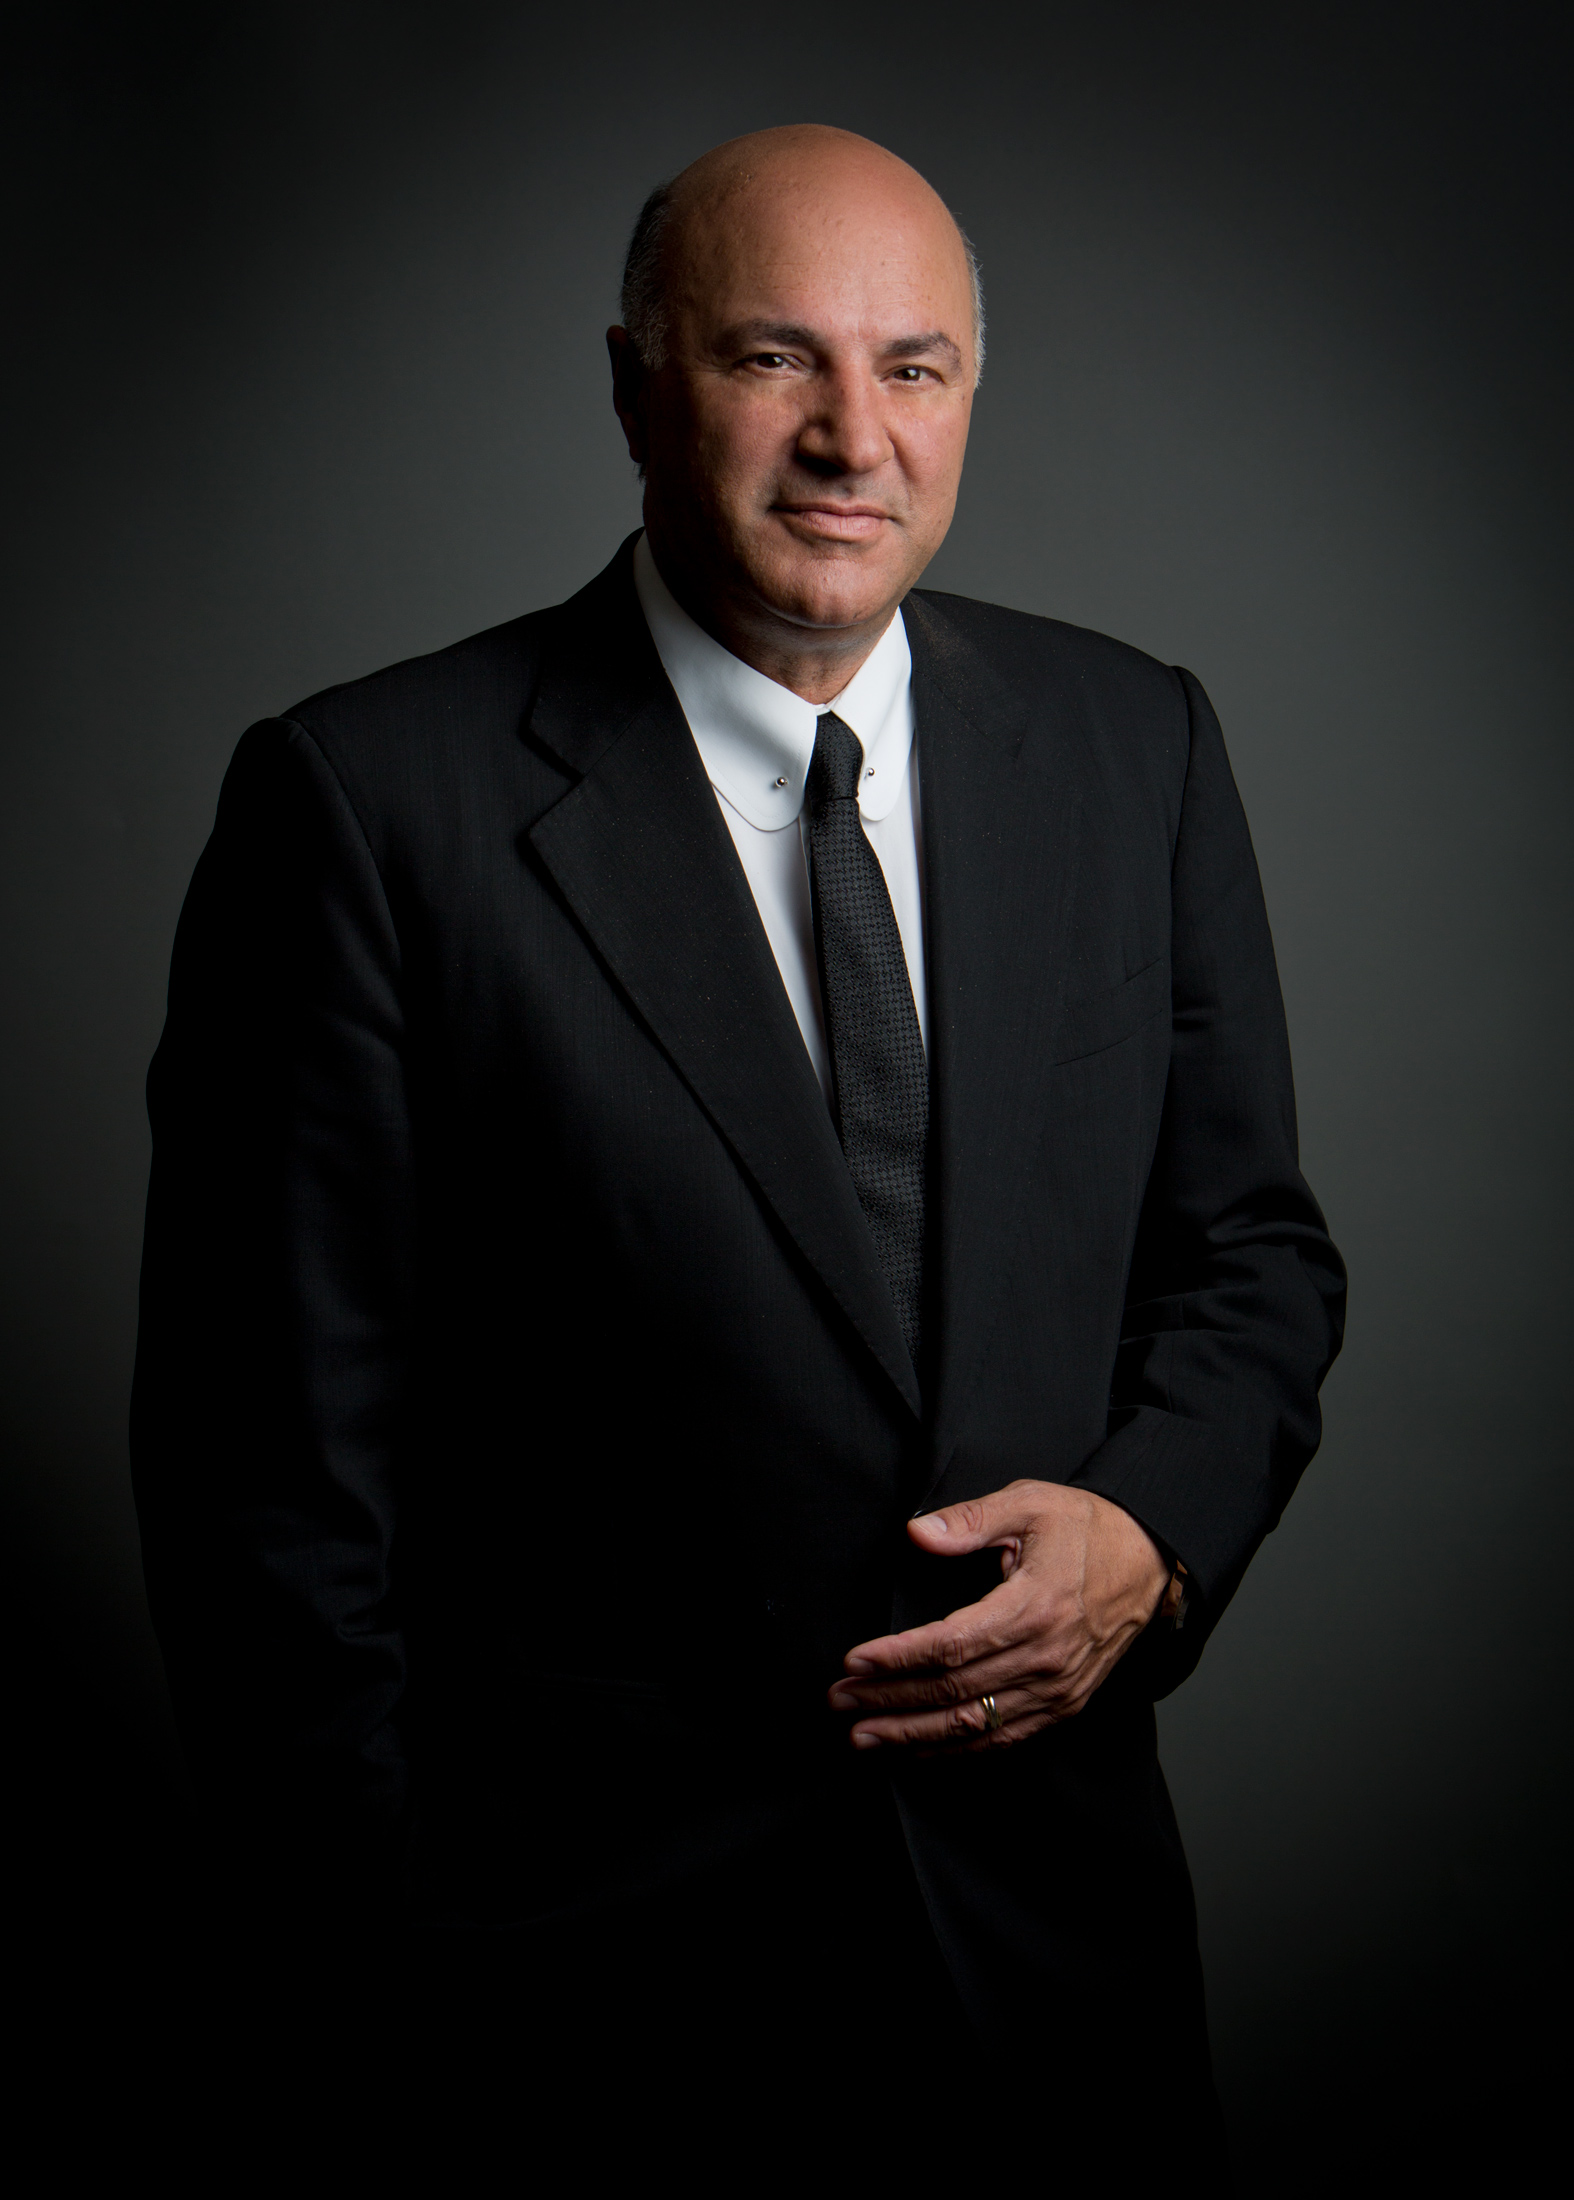 KevinOleary0359